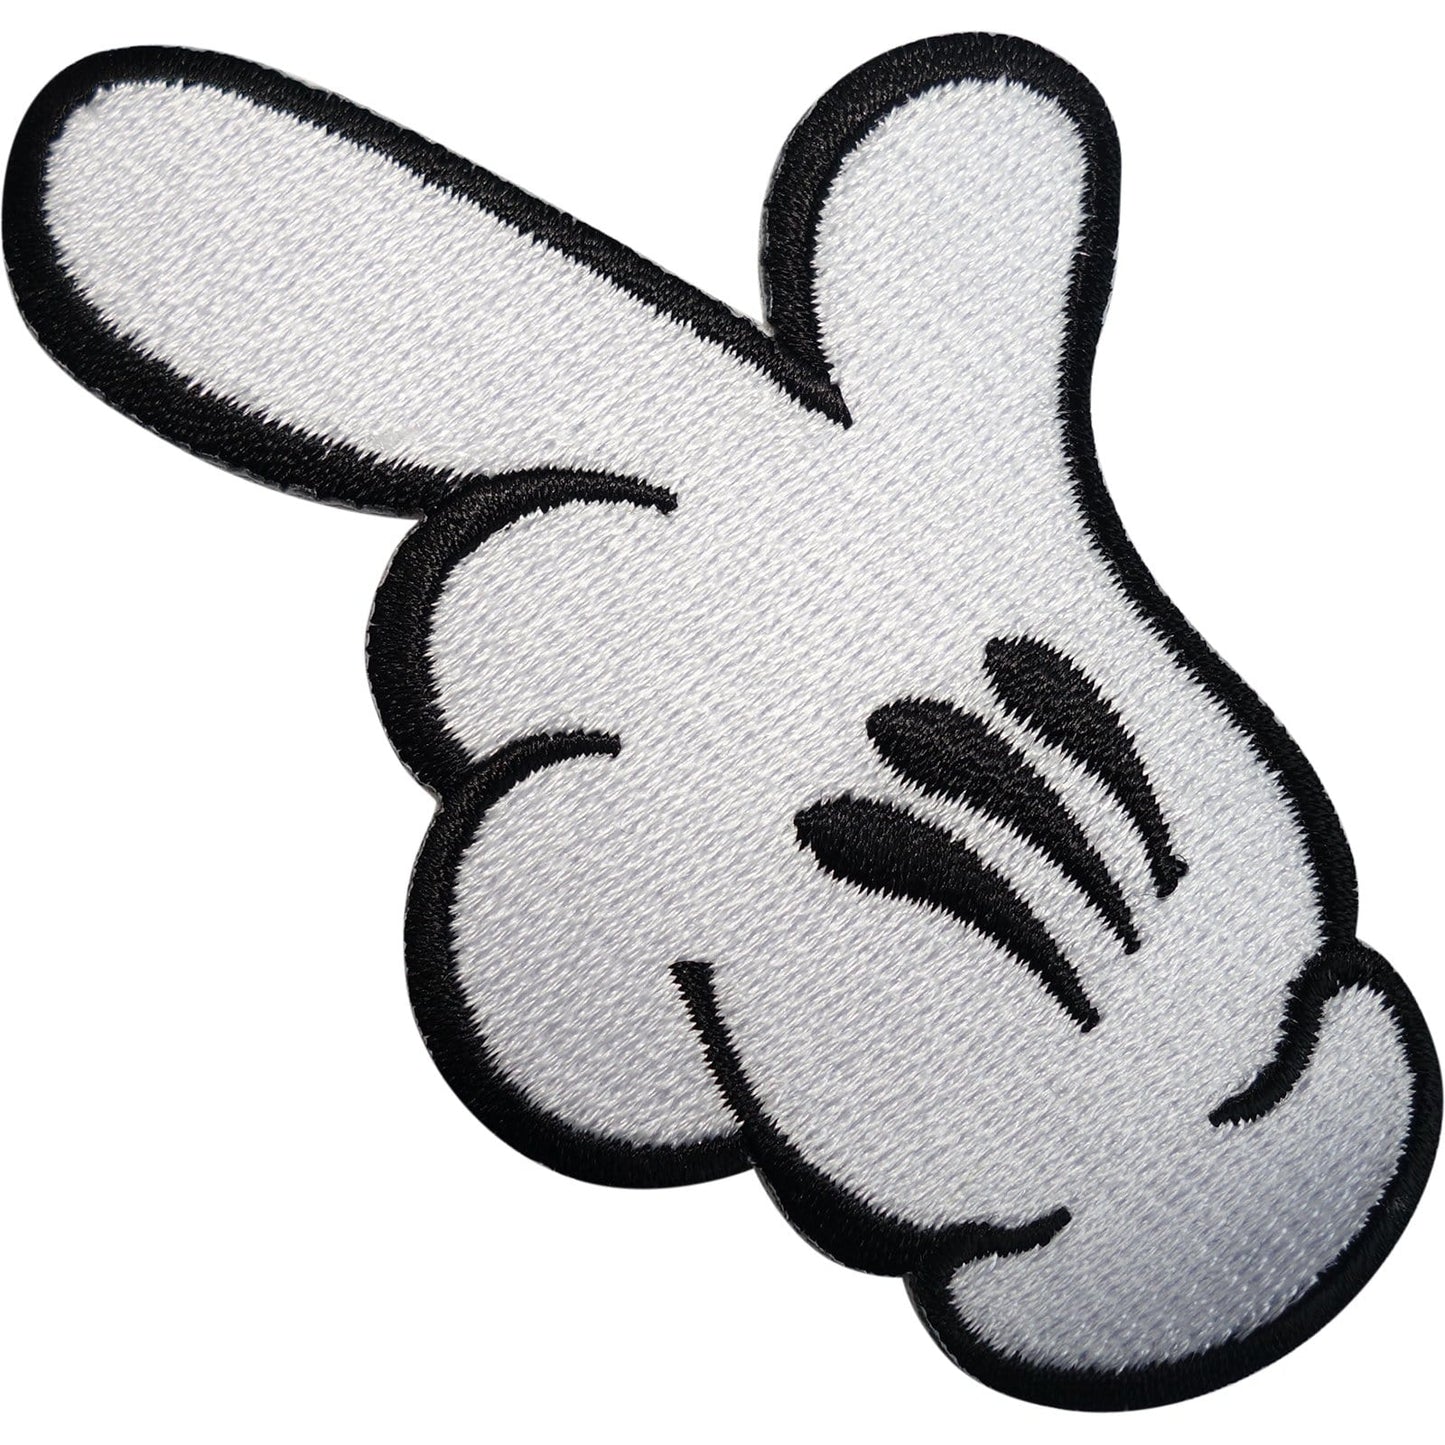 White Glove Cartoon Hand Patch Embroidered Badge Iron Sew On Clothes Jeans Bag